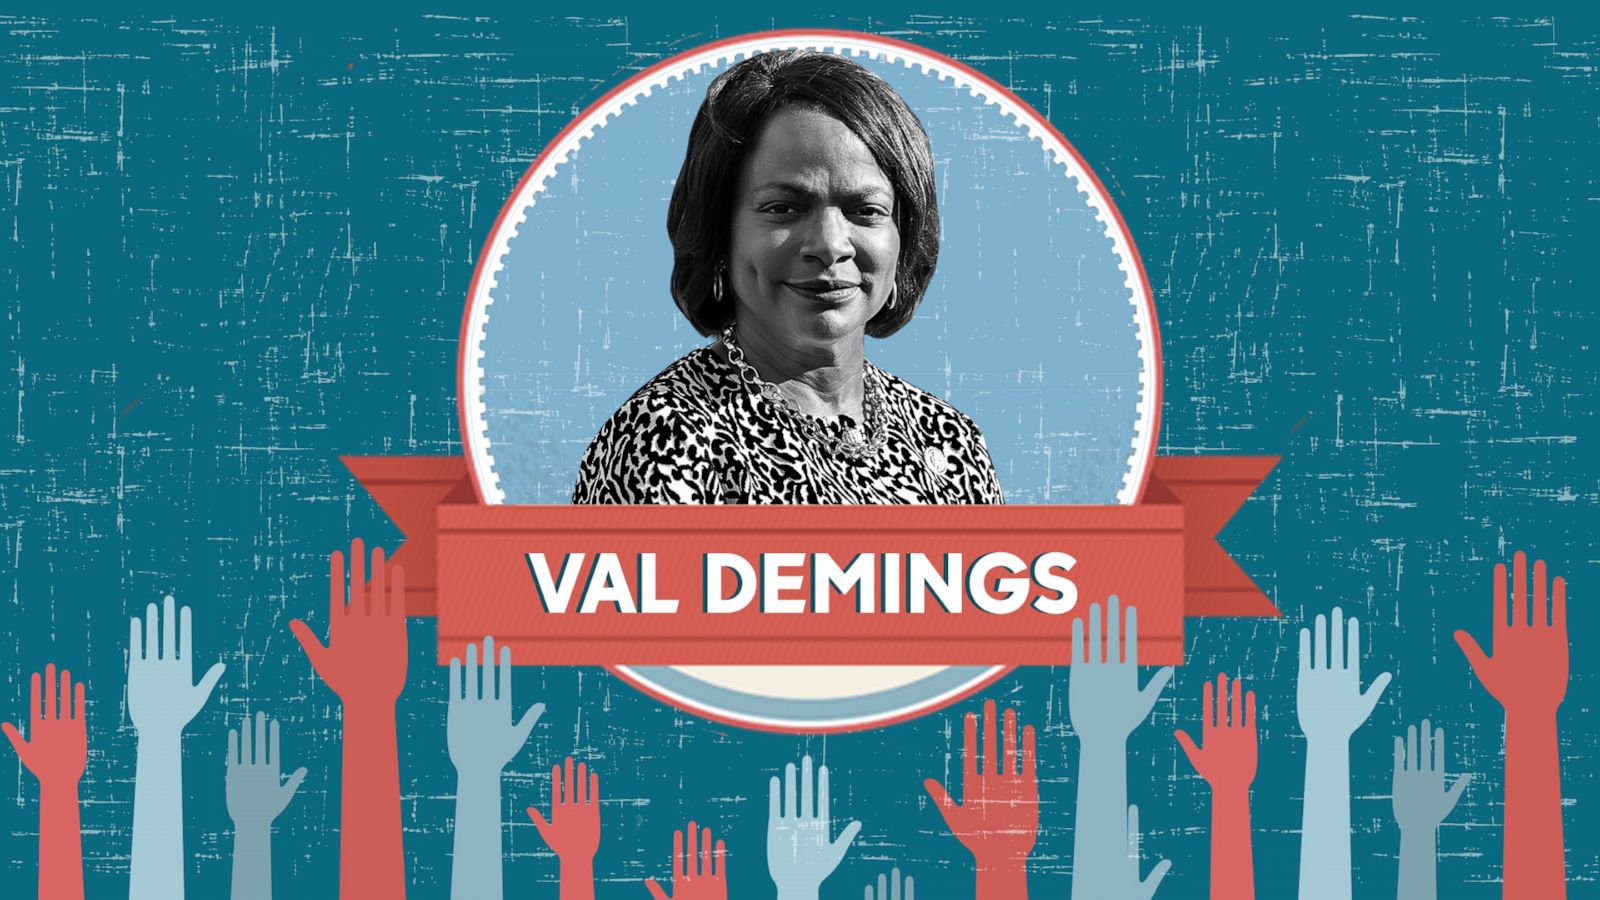 Rep Val Demings How Black Women Excluded From Suffrage Movement Kept Fighting For Freedom Abc News,Blackmagic Design Video Assist Hdmi6g Sdi Recorder